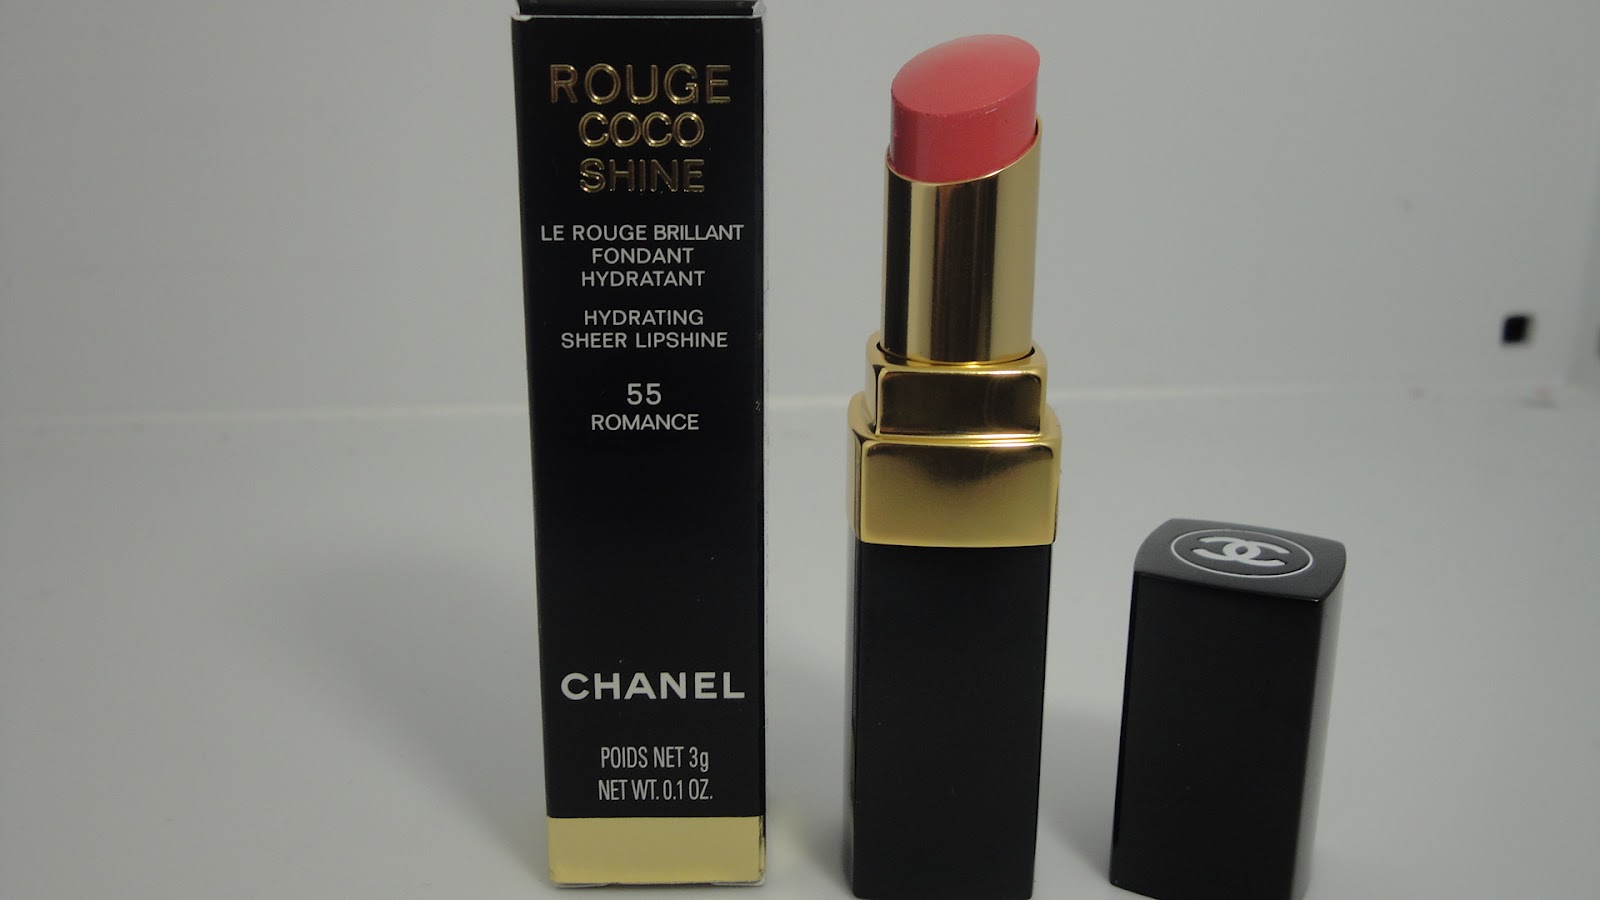 Jayded Dreaming Beauty Blog : 55 ROMANCE CHANEL ROUGE COCO SHINE